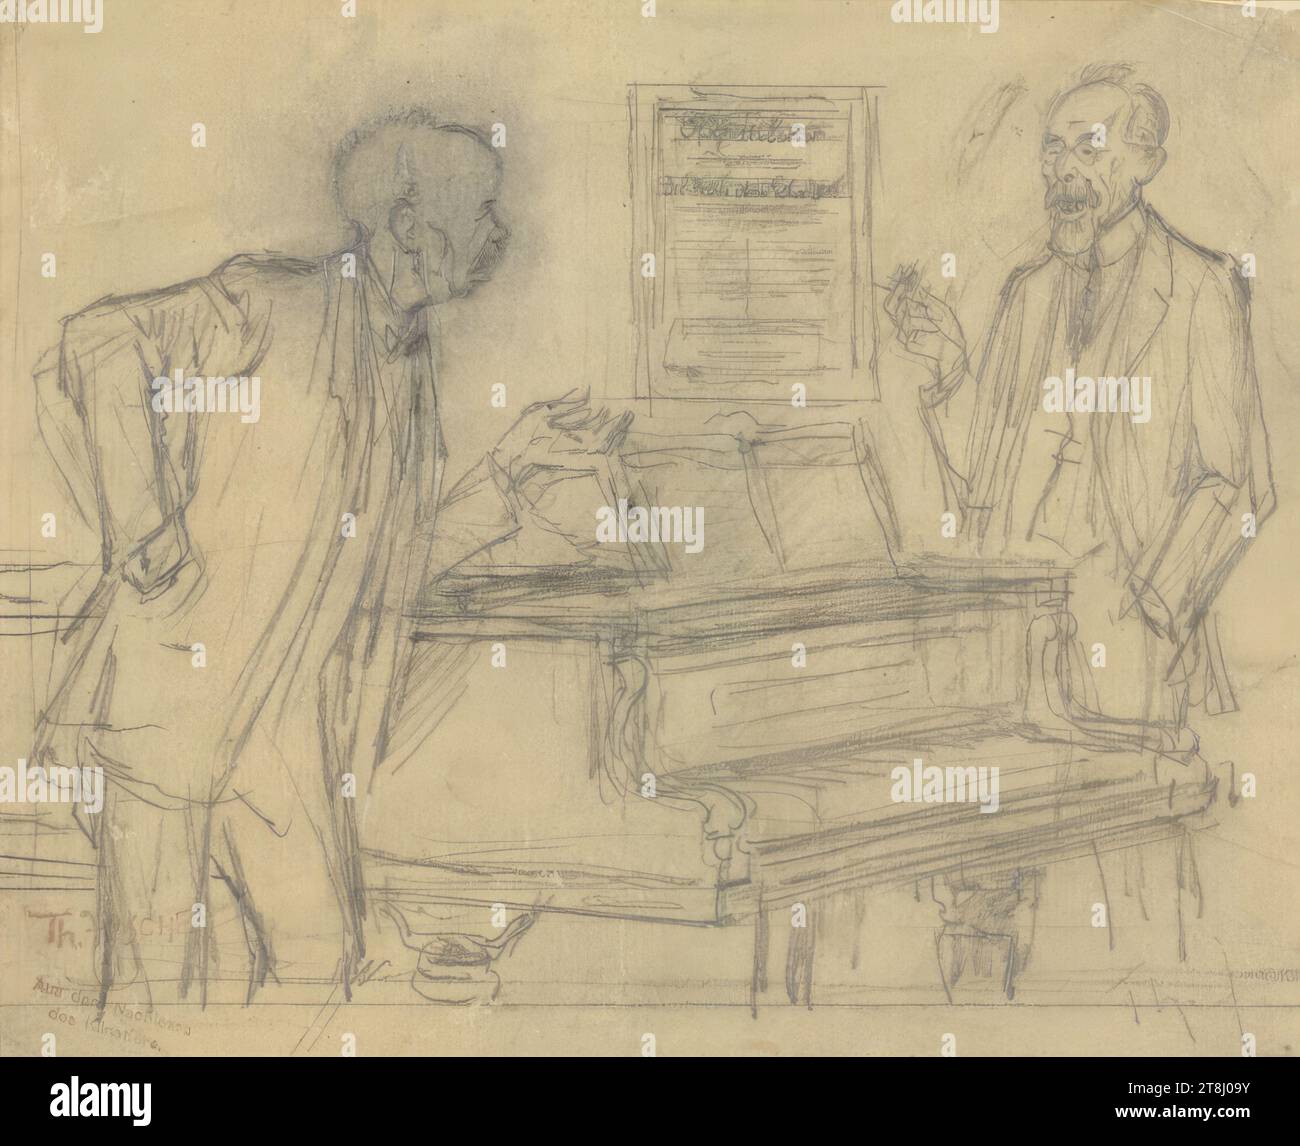 Caricature: Richard Strauss and Franz Schalk at the piano, Theodor Zasche, Vienna 1862 - 1922 Vienna, drawing, pencil, according to Cahier: 17.2 x 22.2 cm, l.l. 'Th. ZASH / From the estate / of the artist, Austria Stock Photo